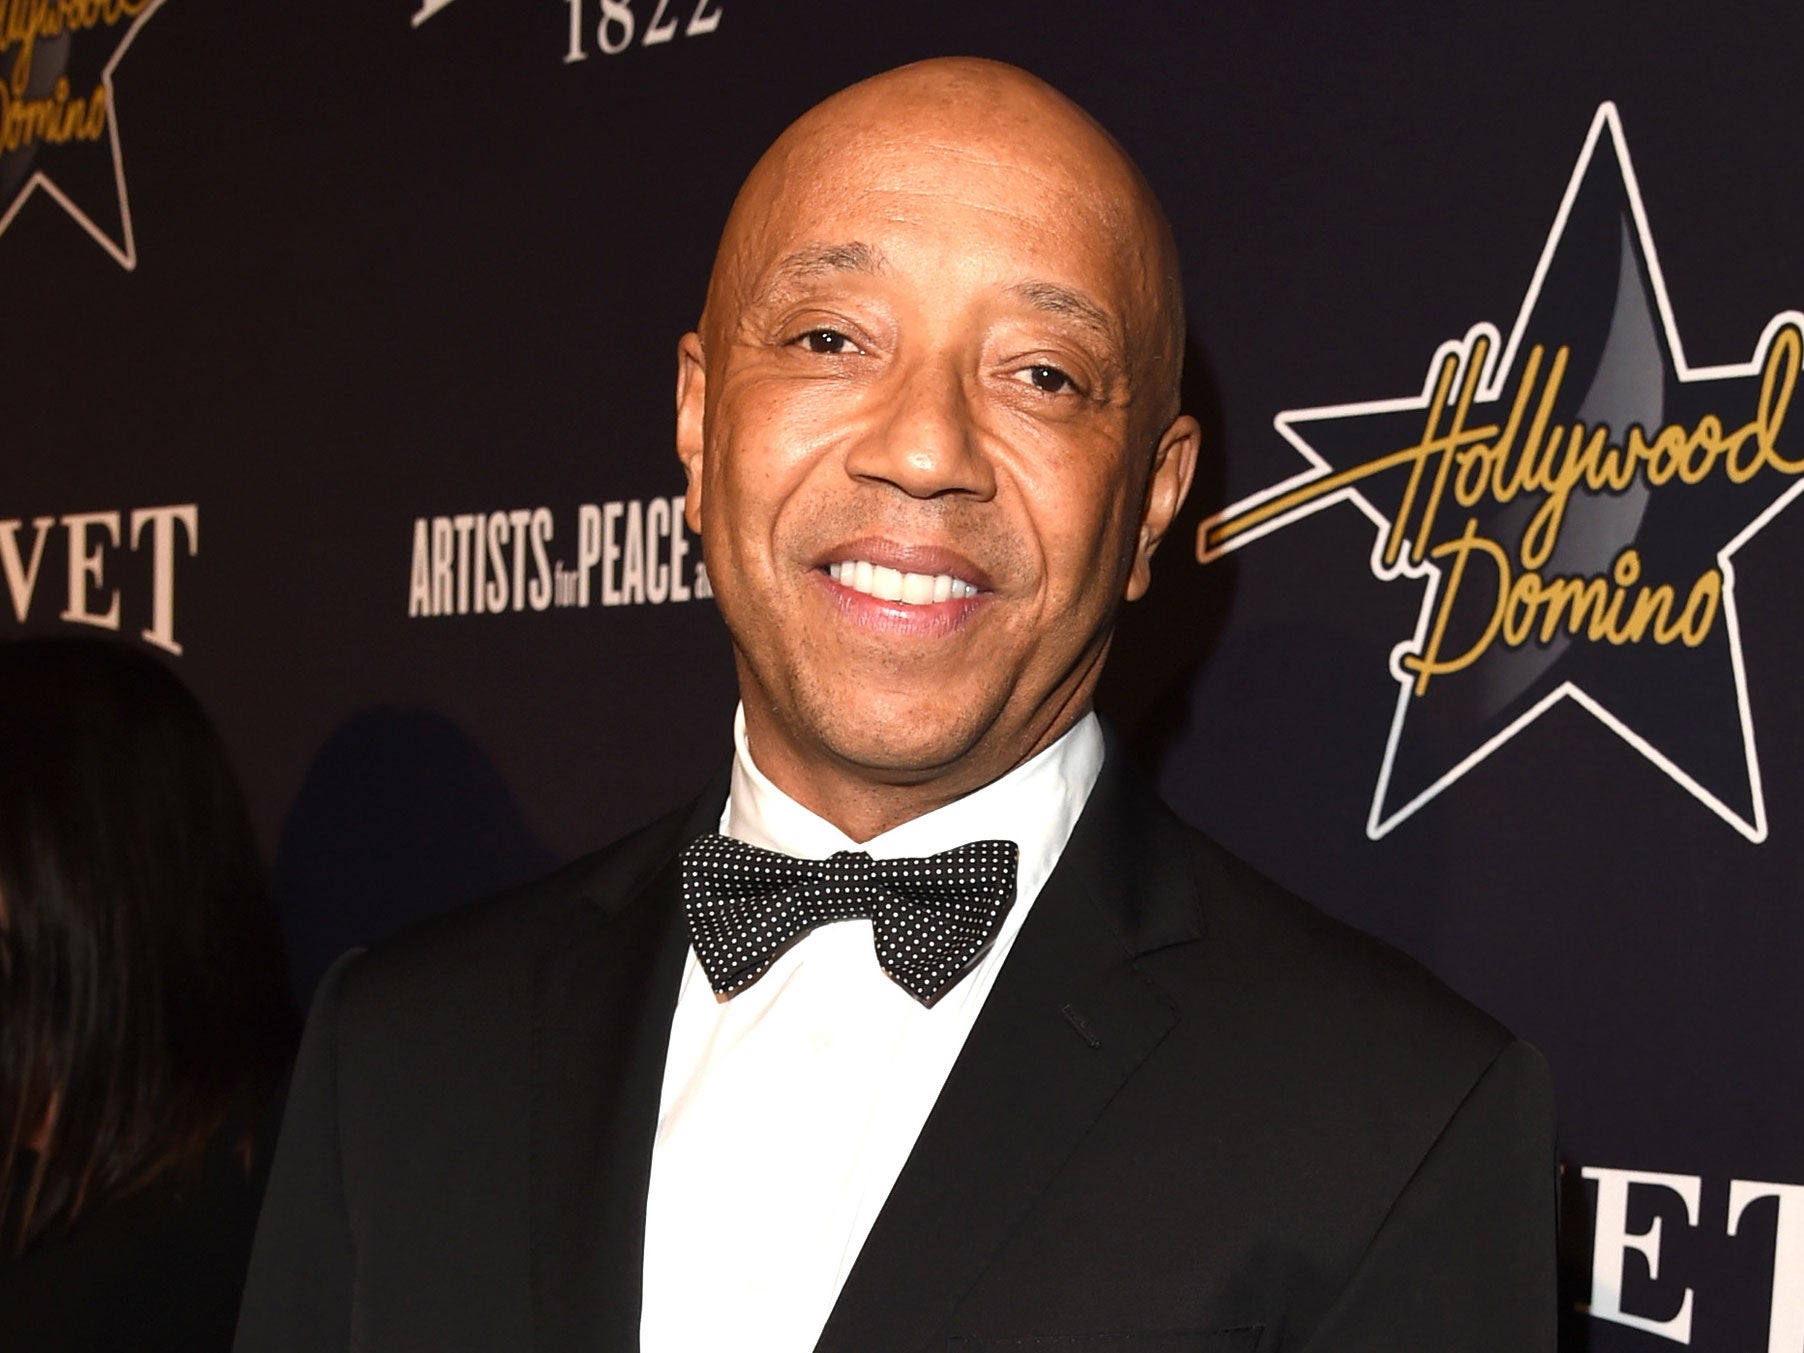 Def Jam boss Russell Simmons is facing a civil complaint over an alleged rape in the 1990s